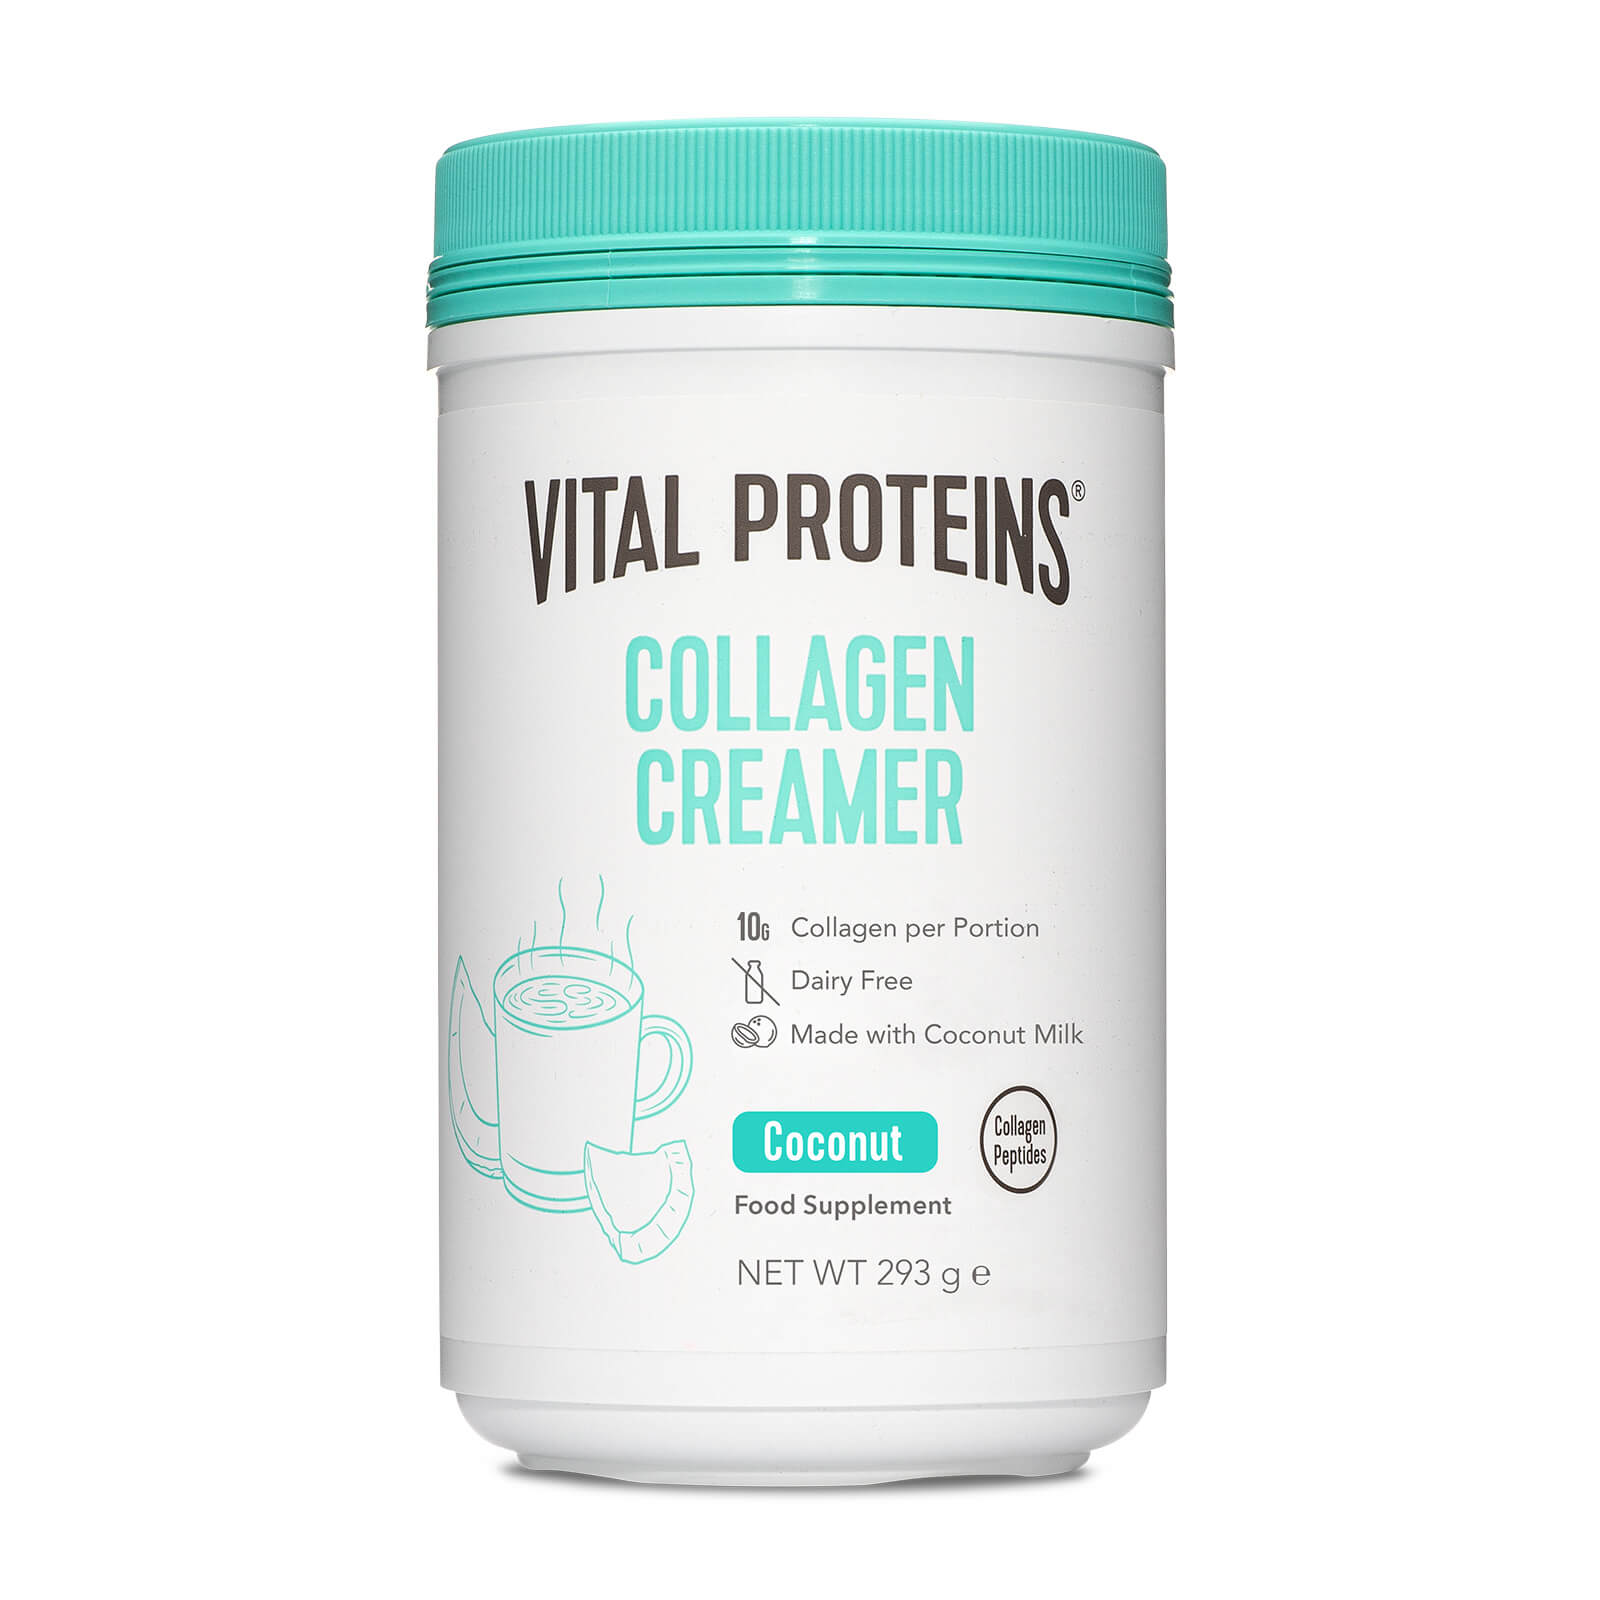 Collagen Creamer - Coconut Subscription - Delivery Every 1 Month